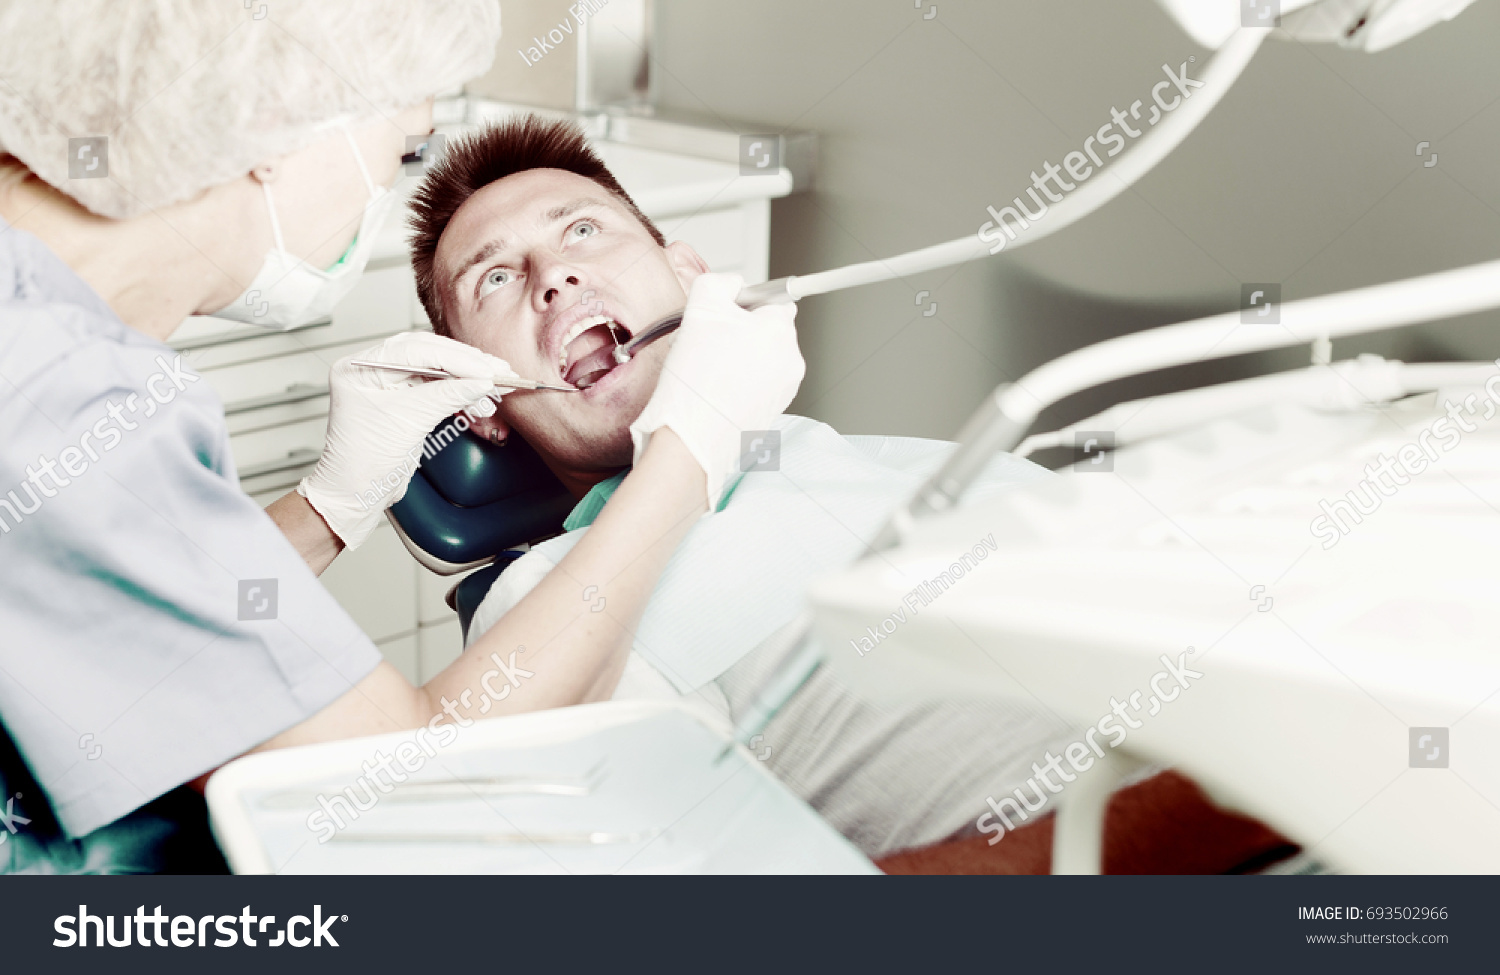 Male patient sitting on chair in dental office getting dentist treatment #693502966